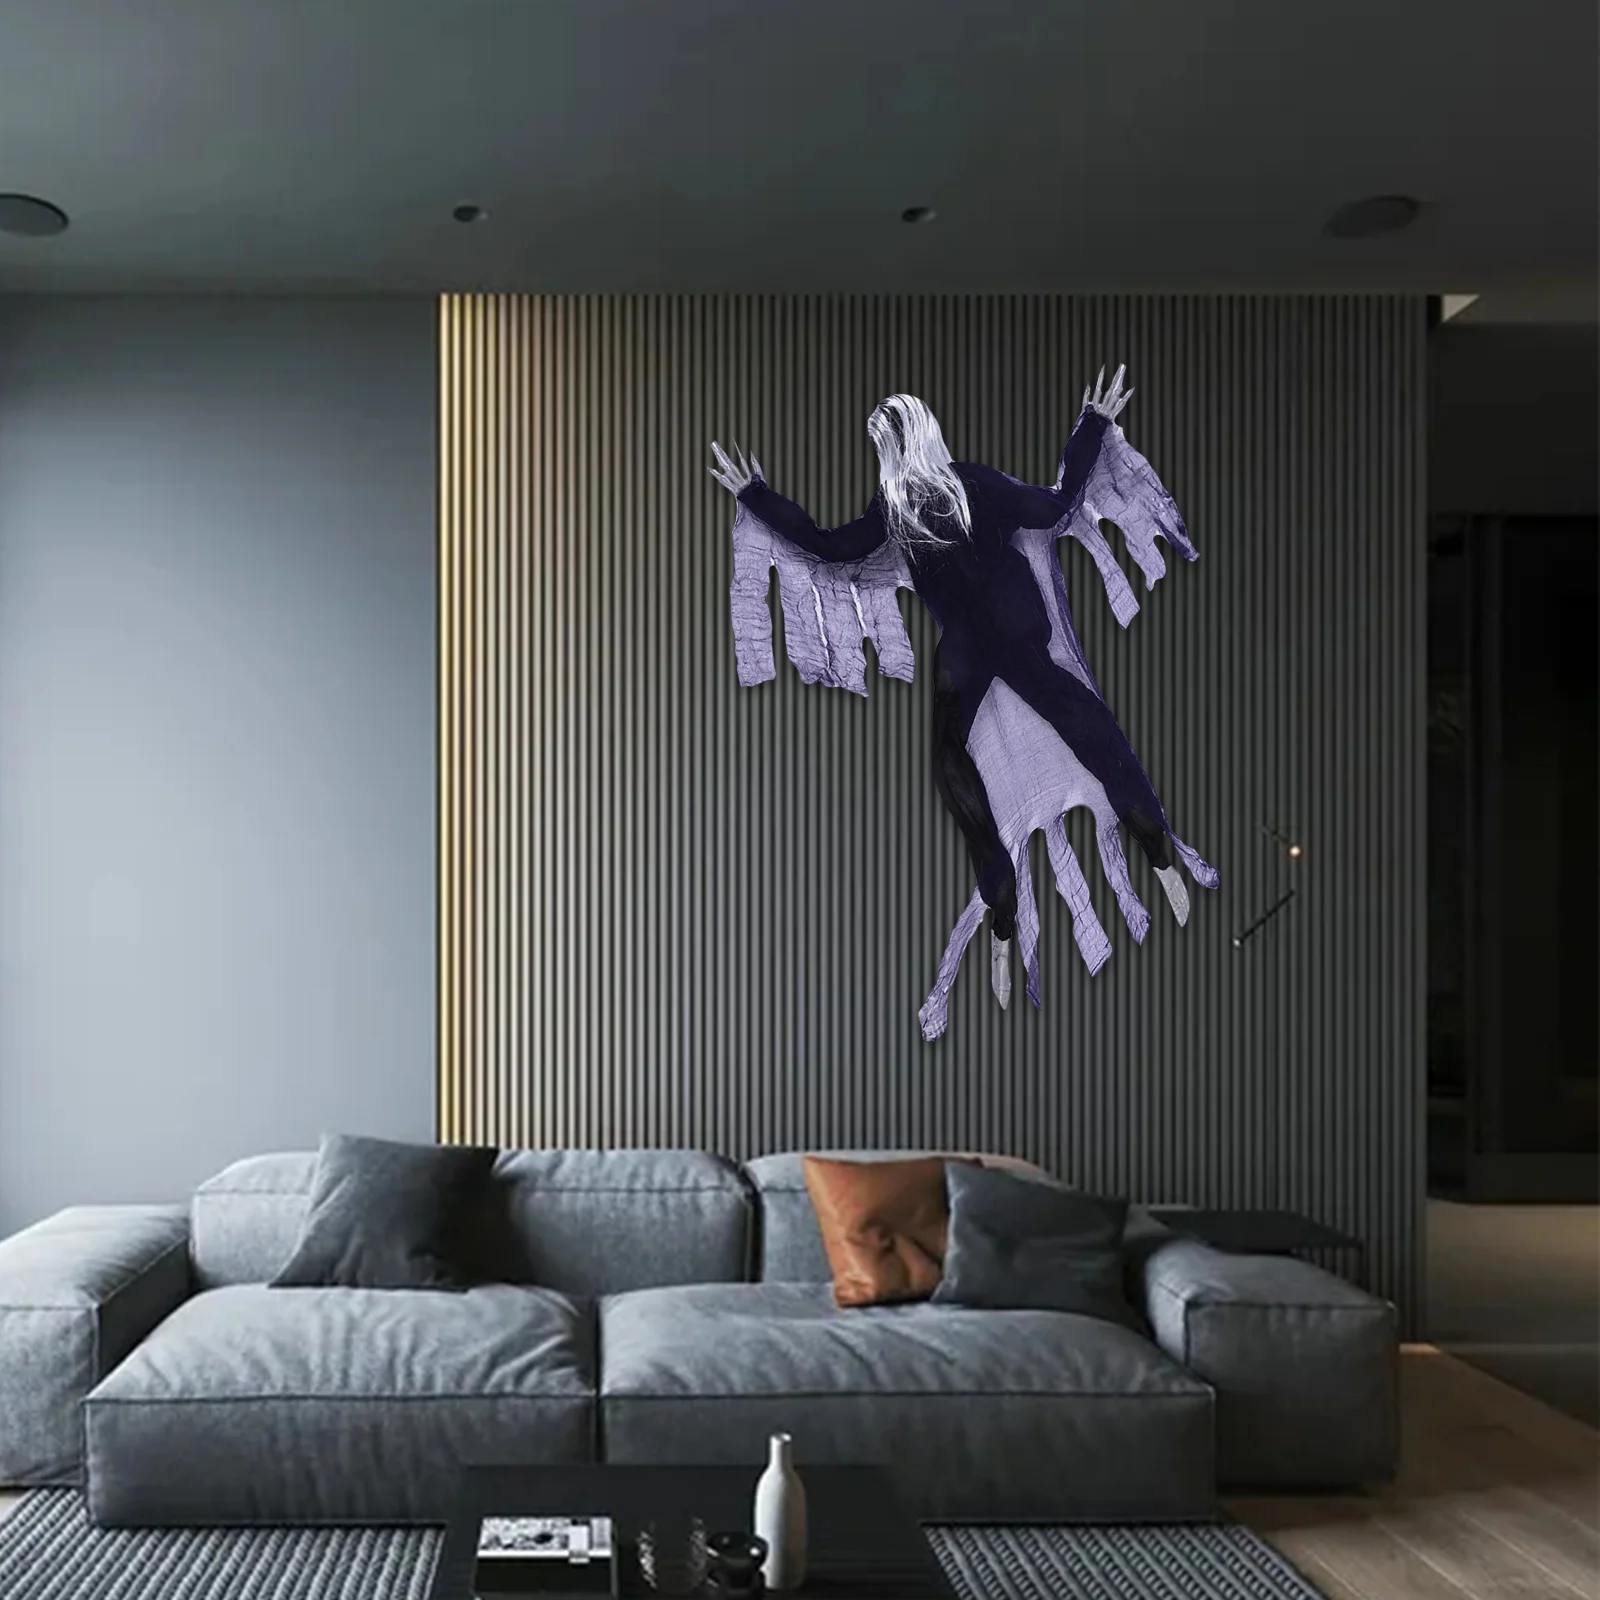 Funny Evil Halloween Haunted Wall Climbing Scary Dead Zombie      Home Outdoor Halloween Hanging Décor